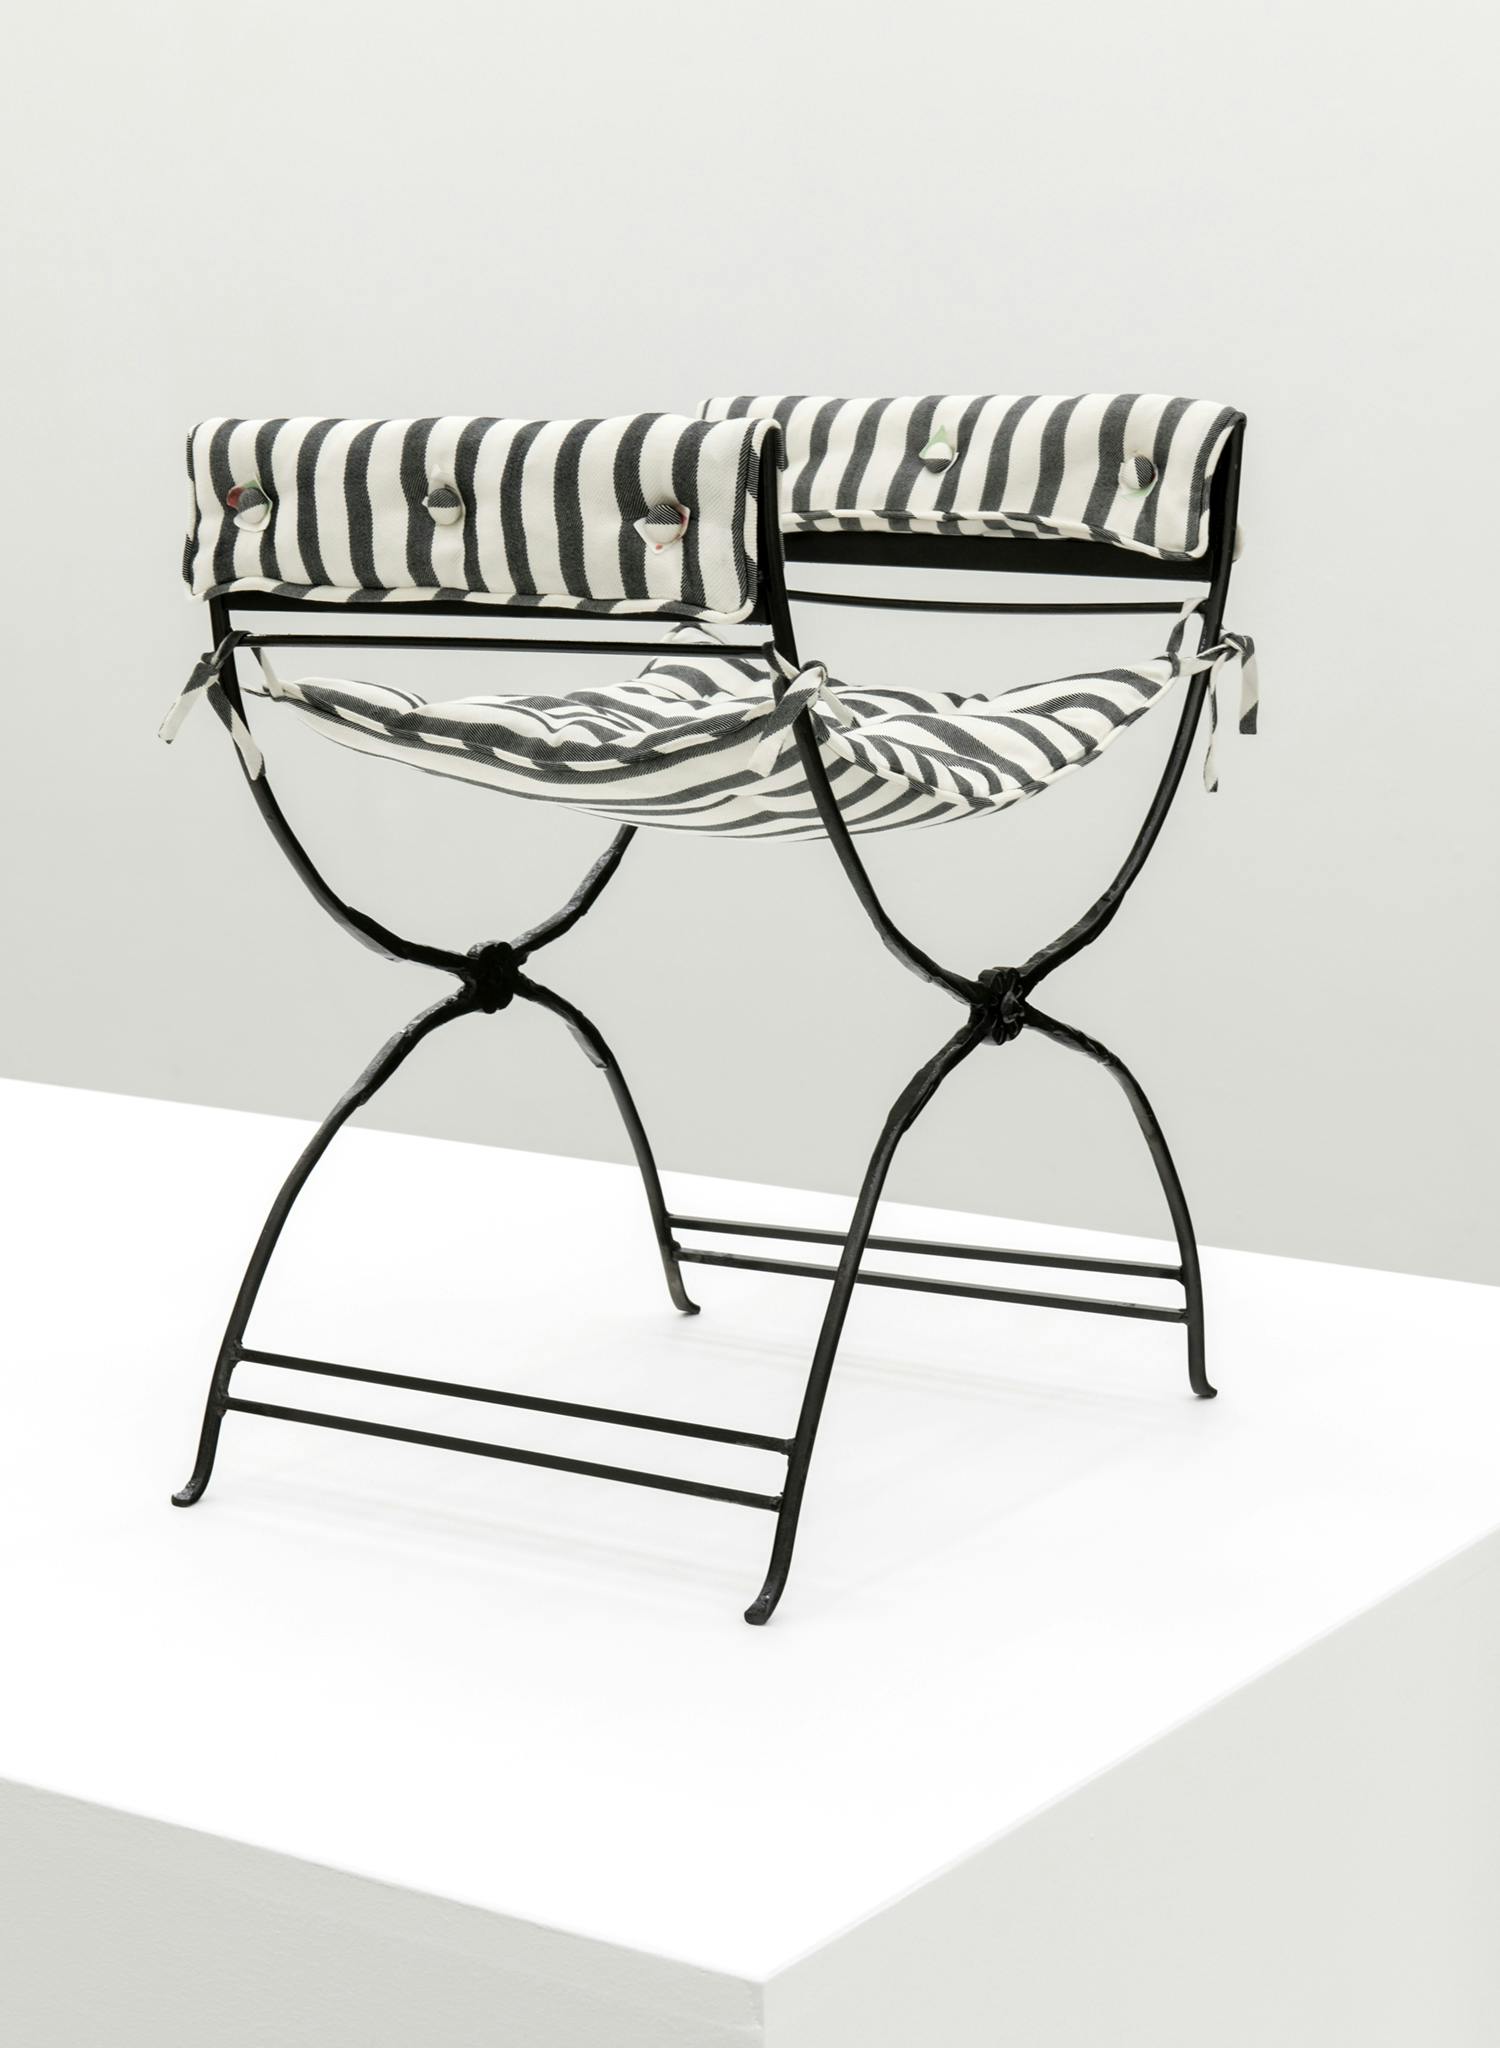 A black stool with black and white striped upholstery sits on top of a plinth. The fabric is made out of hand-woven silk.